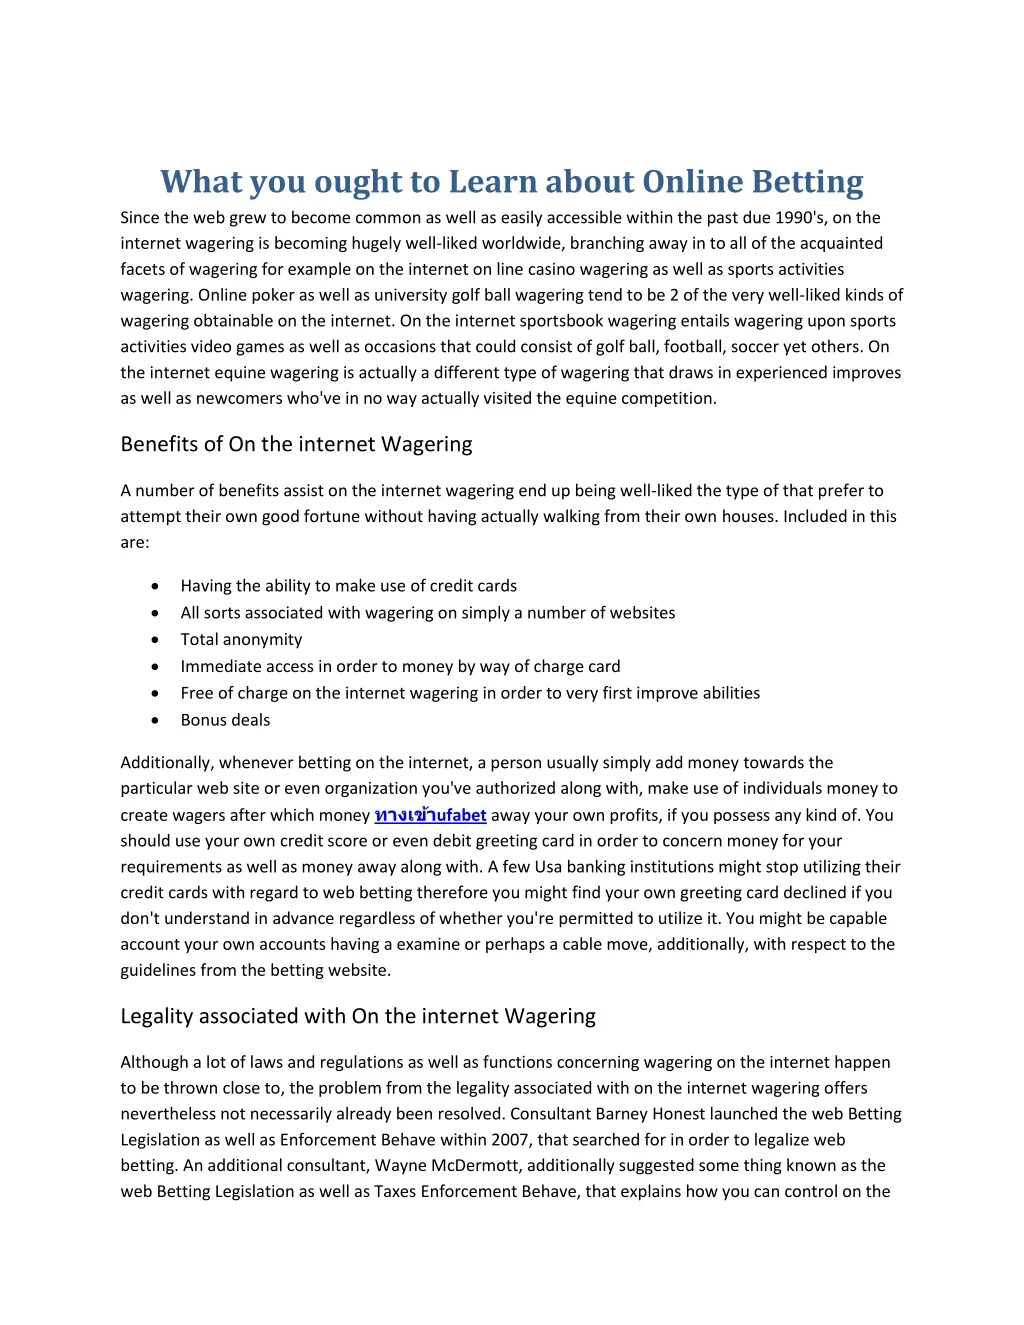 what you ought to learn about online betting